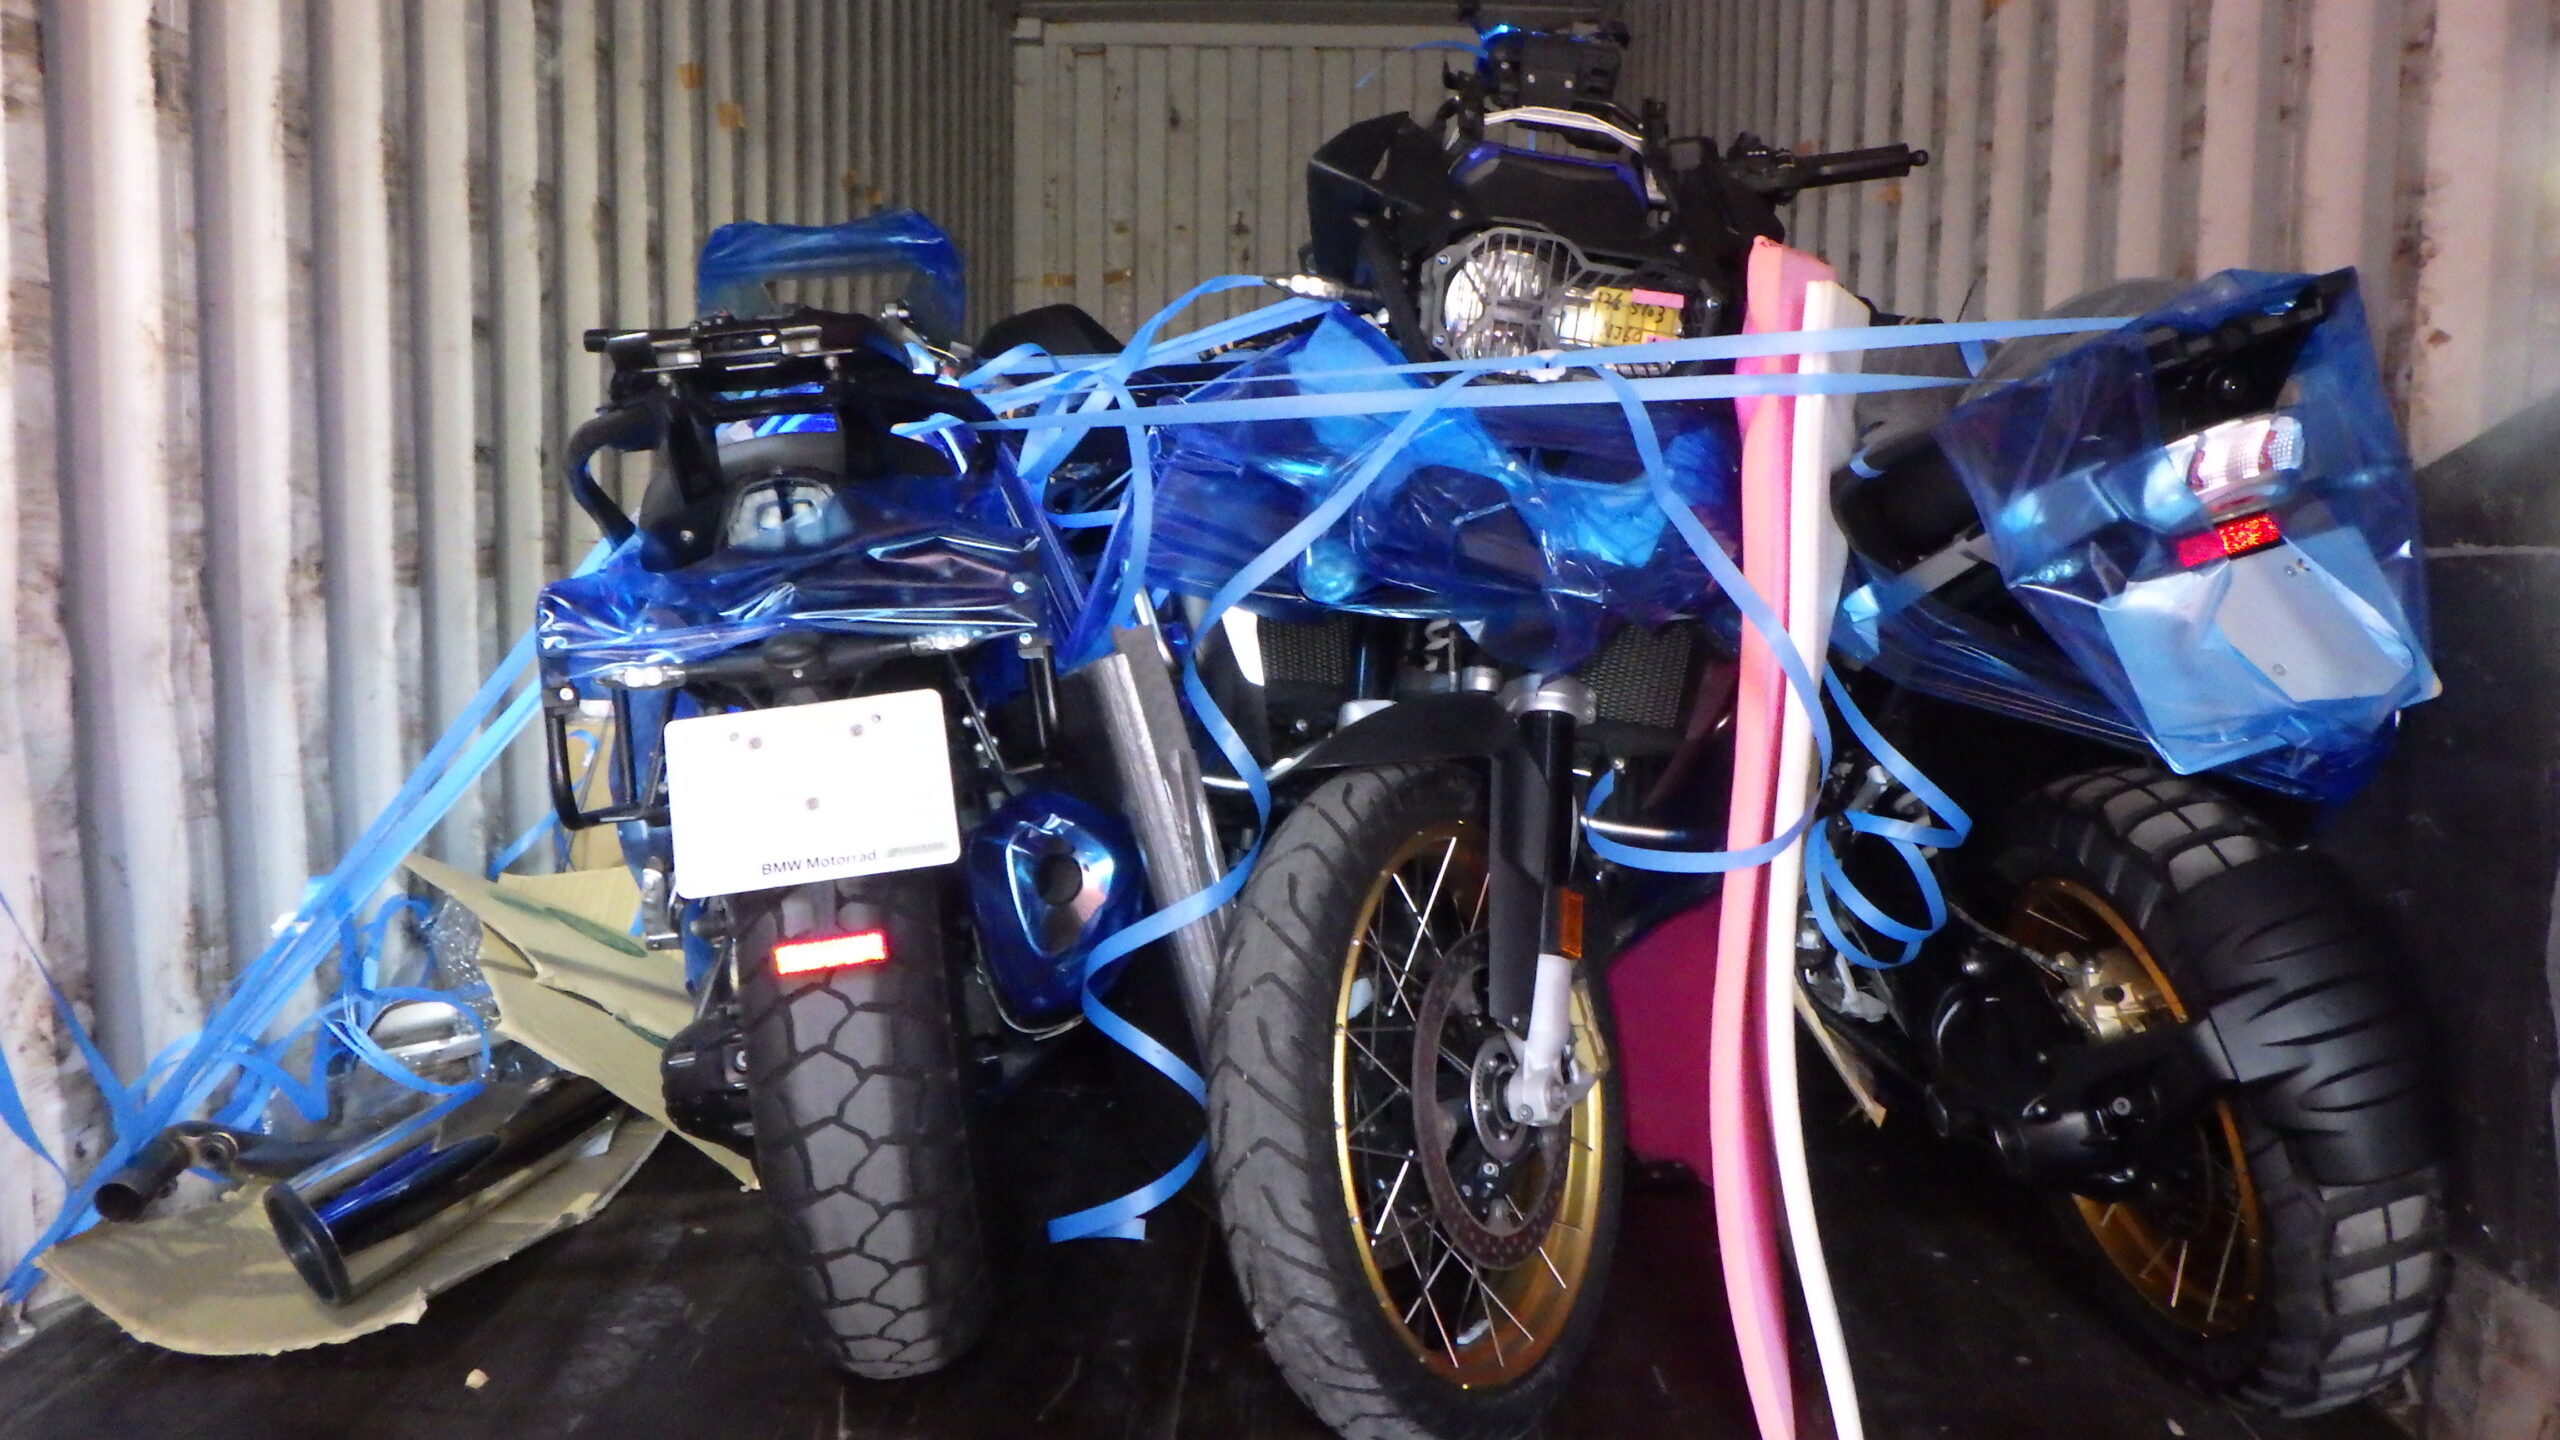 Shipping Example: 40FT Container with 16 Motorcycles